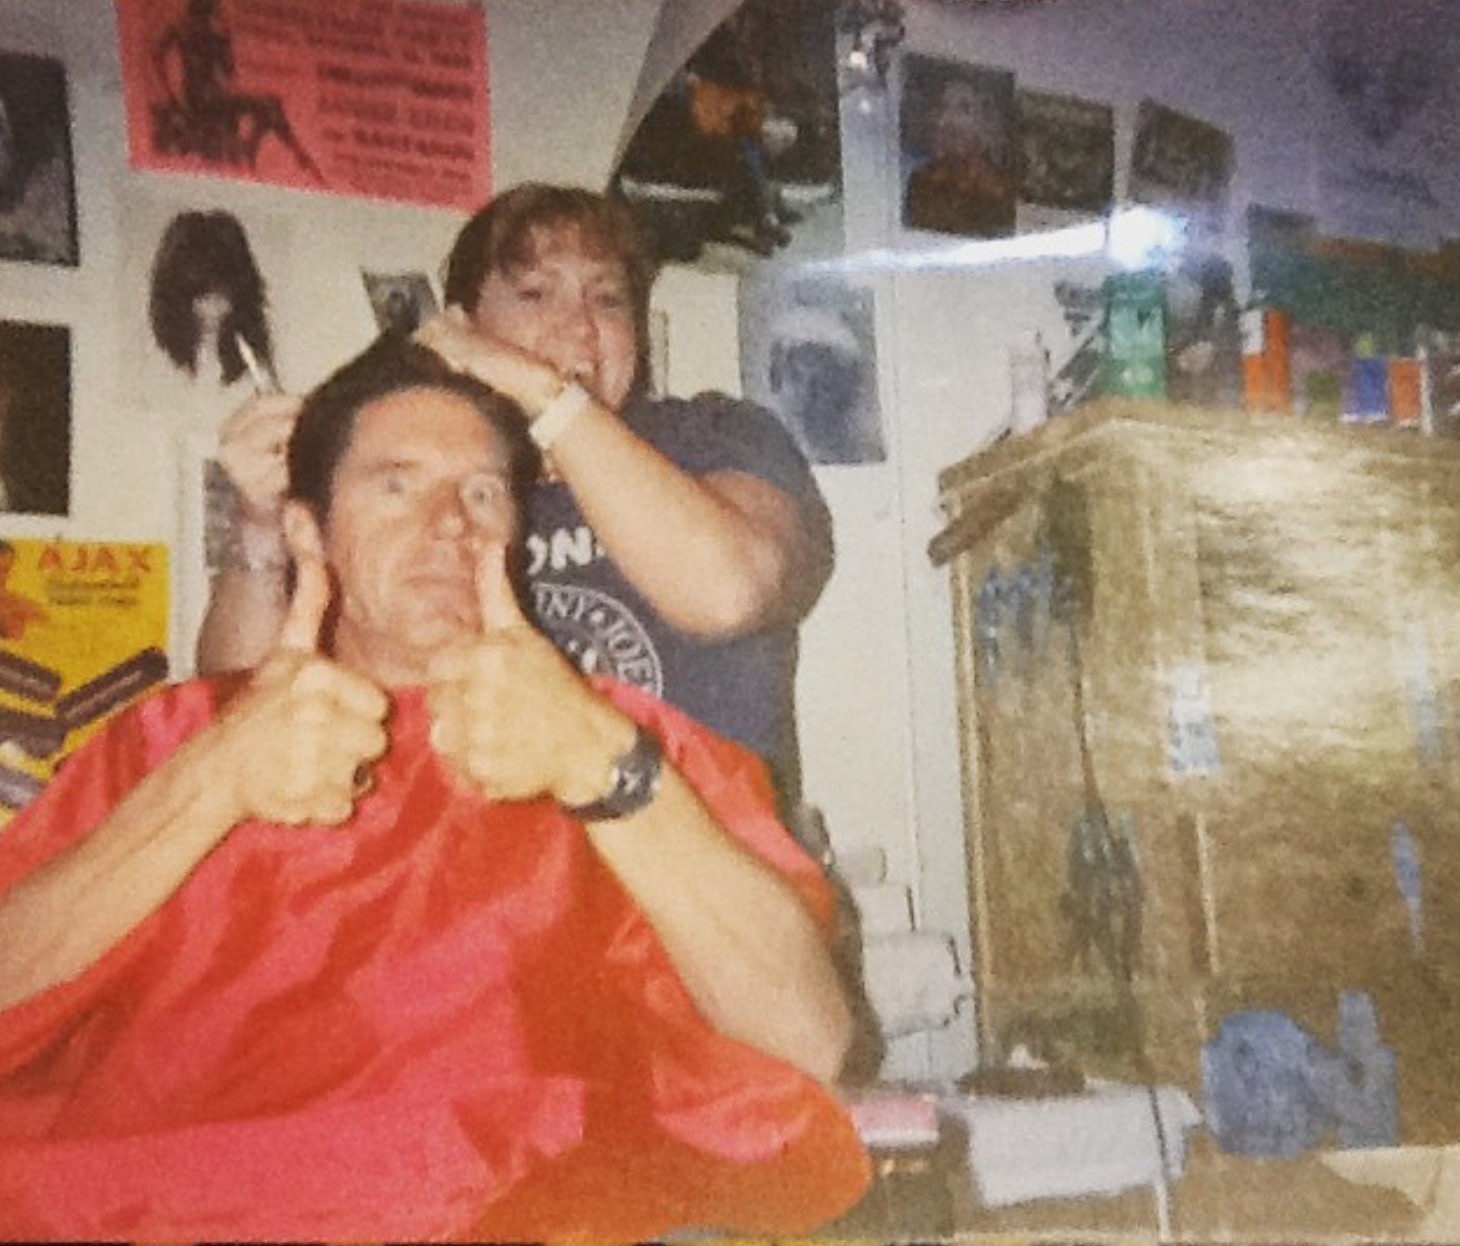 John Doe from X gets a haircut from Mimi Reilly - Photo via Star Booty/Facebook